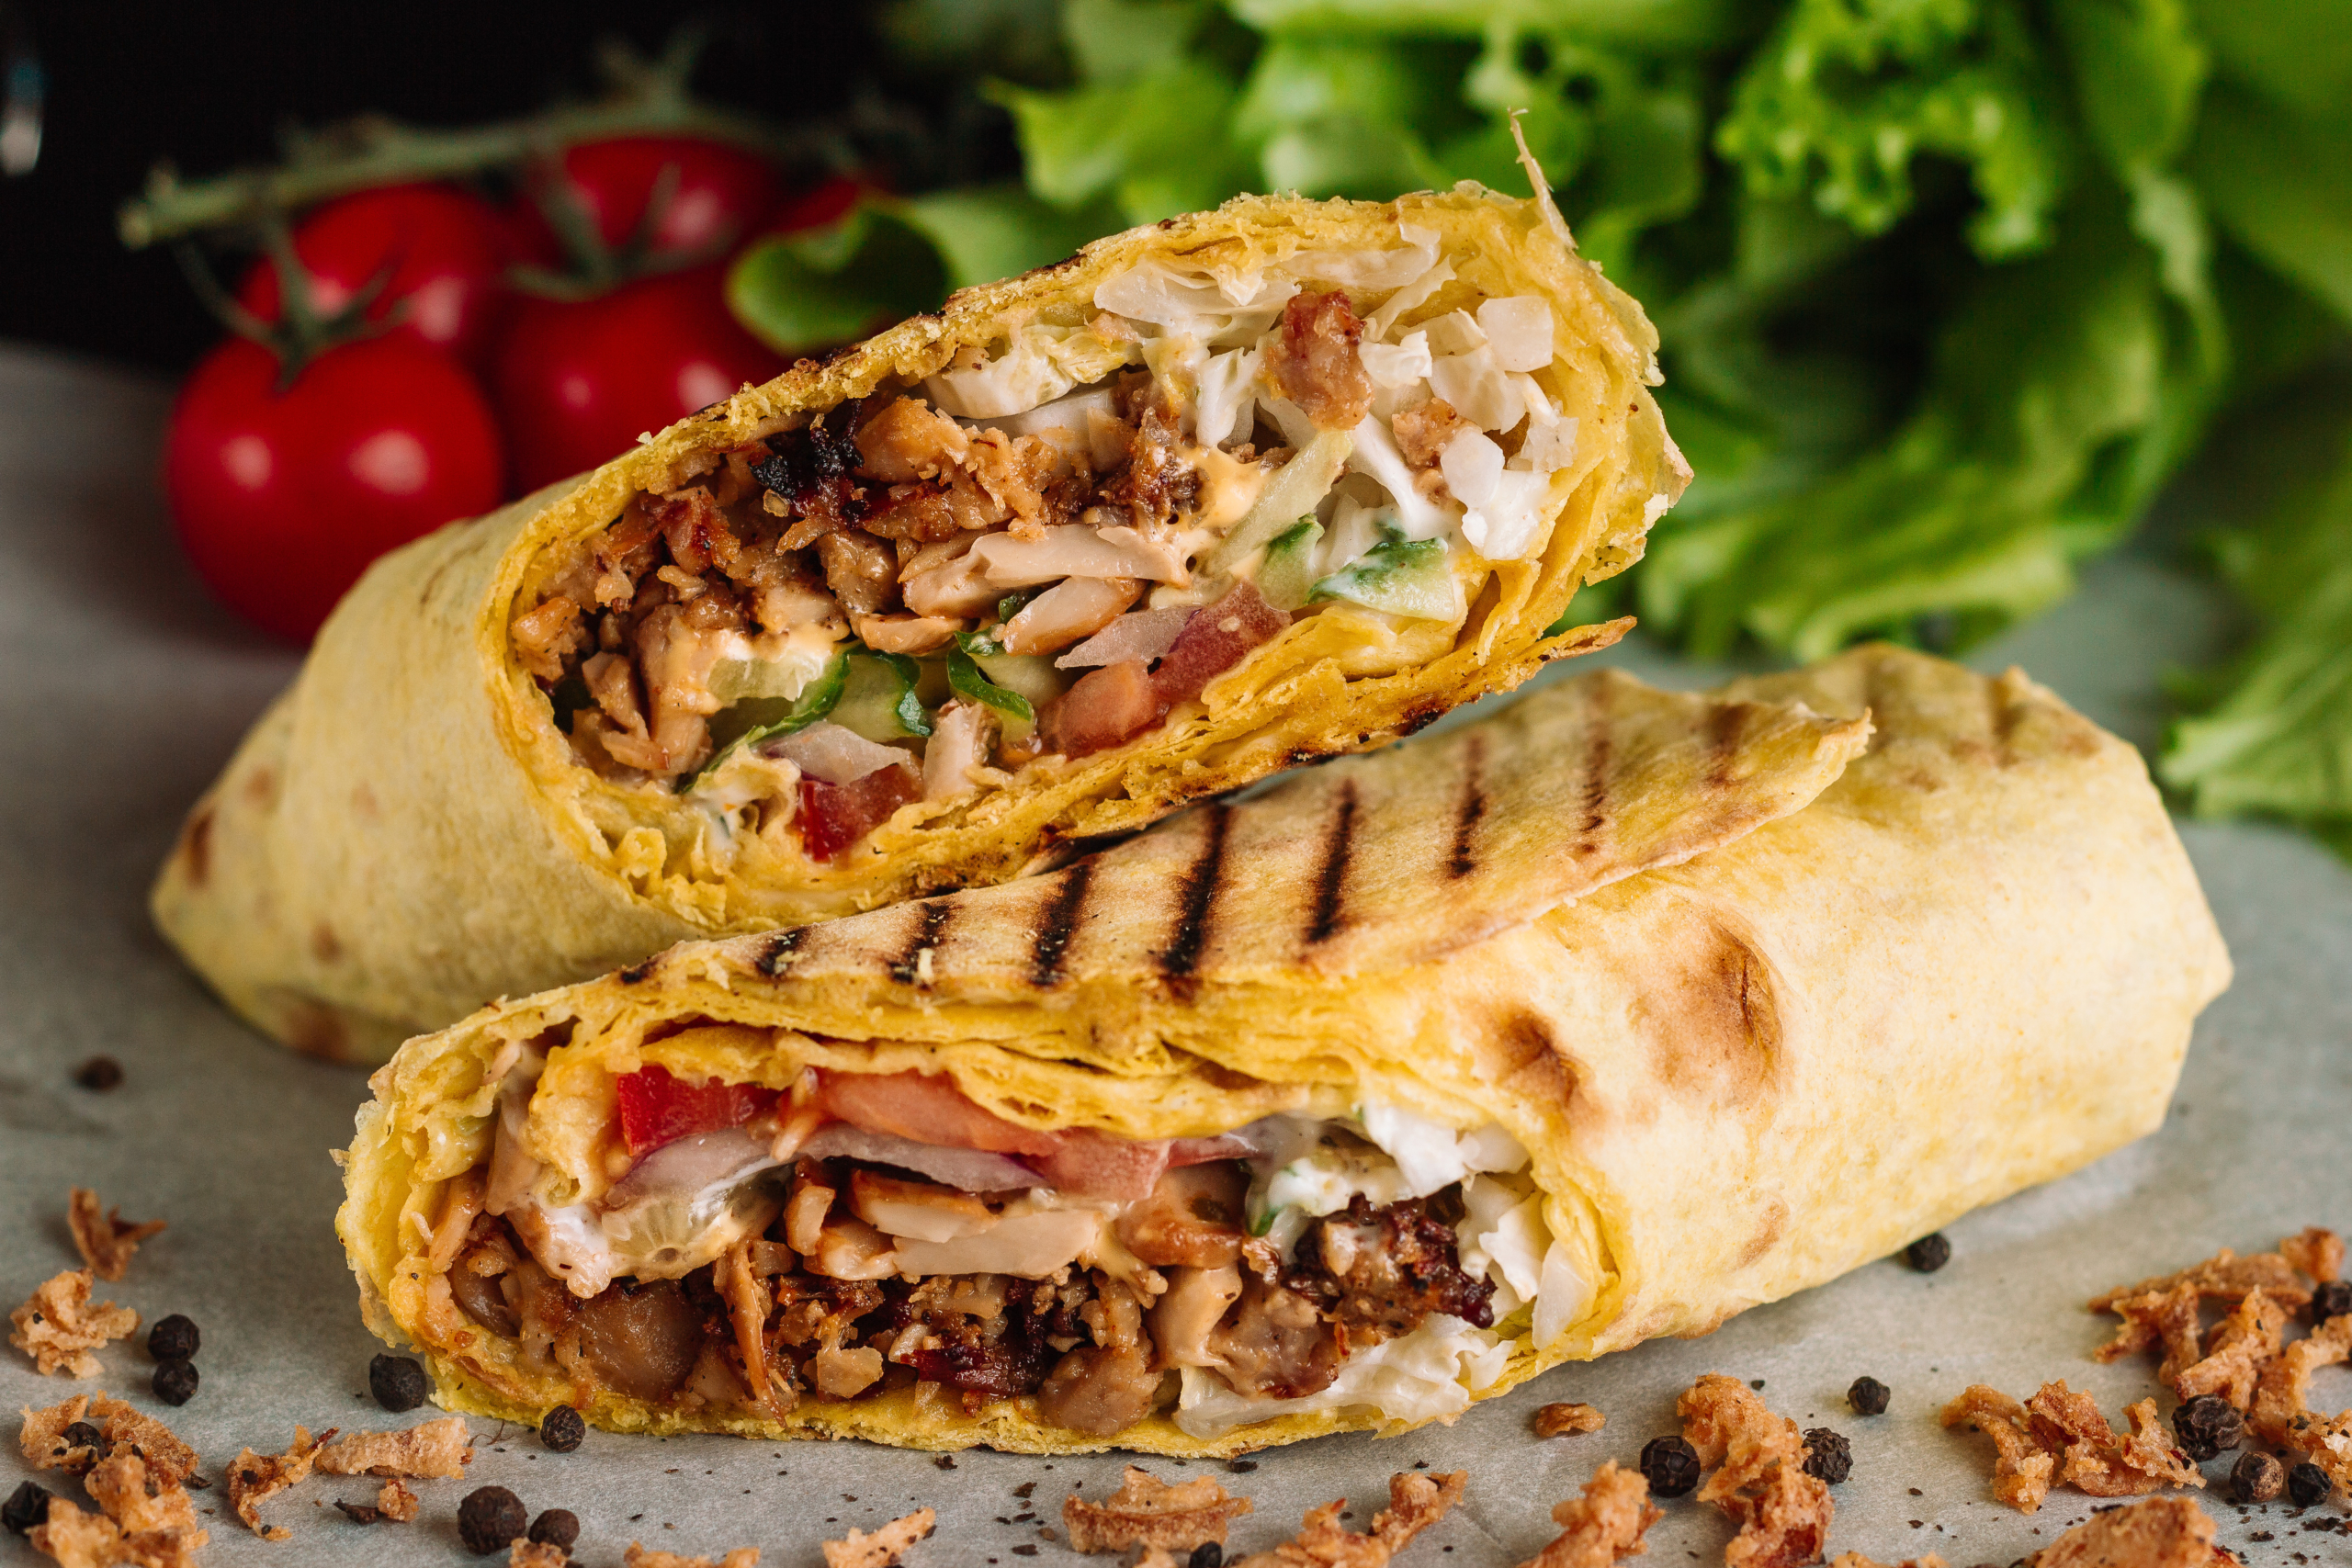 Shawarma sandwich gyro fresh roll of lavash pita bread chicken beef shawarma falafel RecipeTin Eatsfilled with grilled meat, mushrooms, cheese. Traditional Middle Eastern snack. On wooden background.